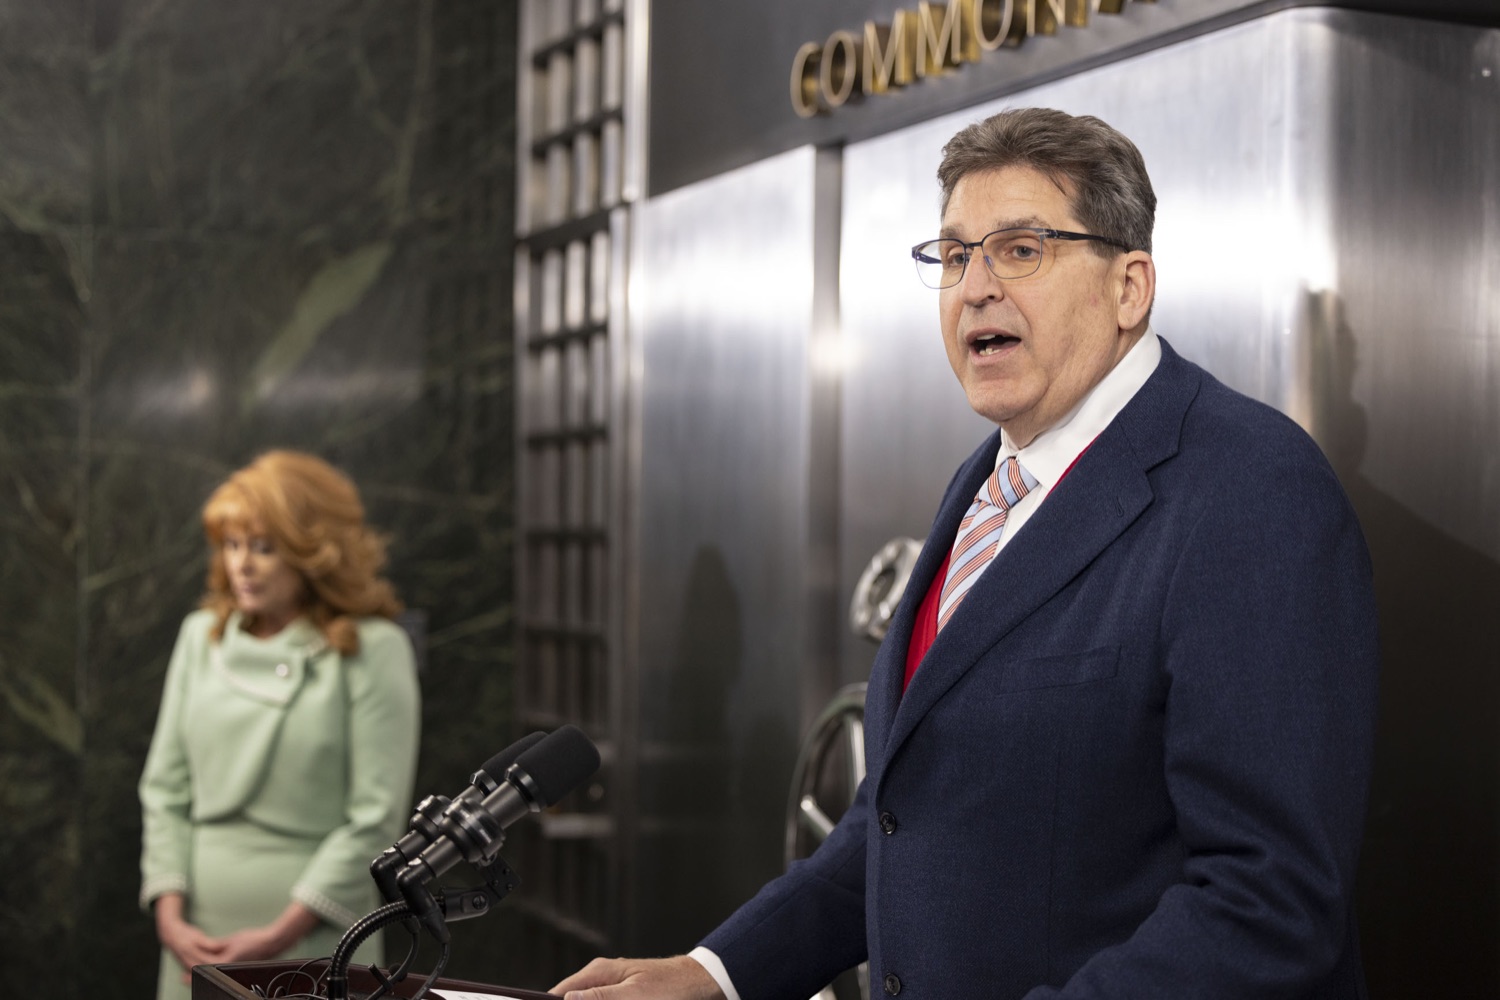 Senator John DiSanto announces legislation to automatically return unclaimed property to rightful owners, in Harrisburg, PA on March 15, 2023.<br><a href="https://filesource.amperwave.net/commonwealthofpa/photo/22711_treas_vault_cz_20.jpg" target="_blank">⇣ Download Photo</a>